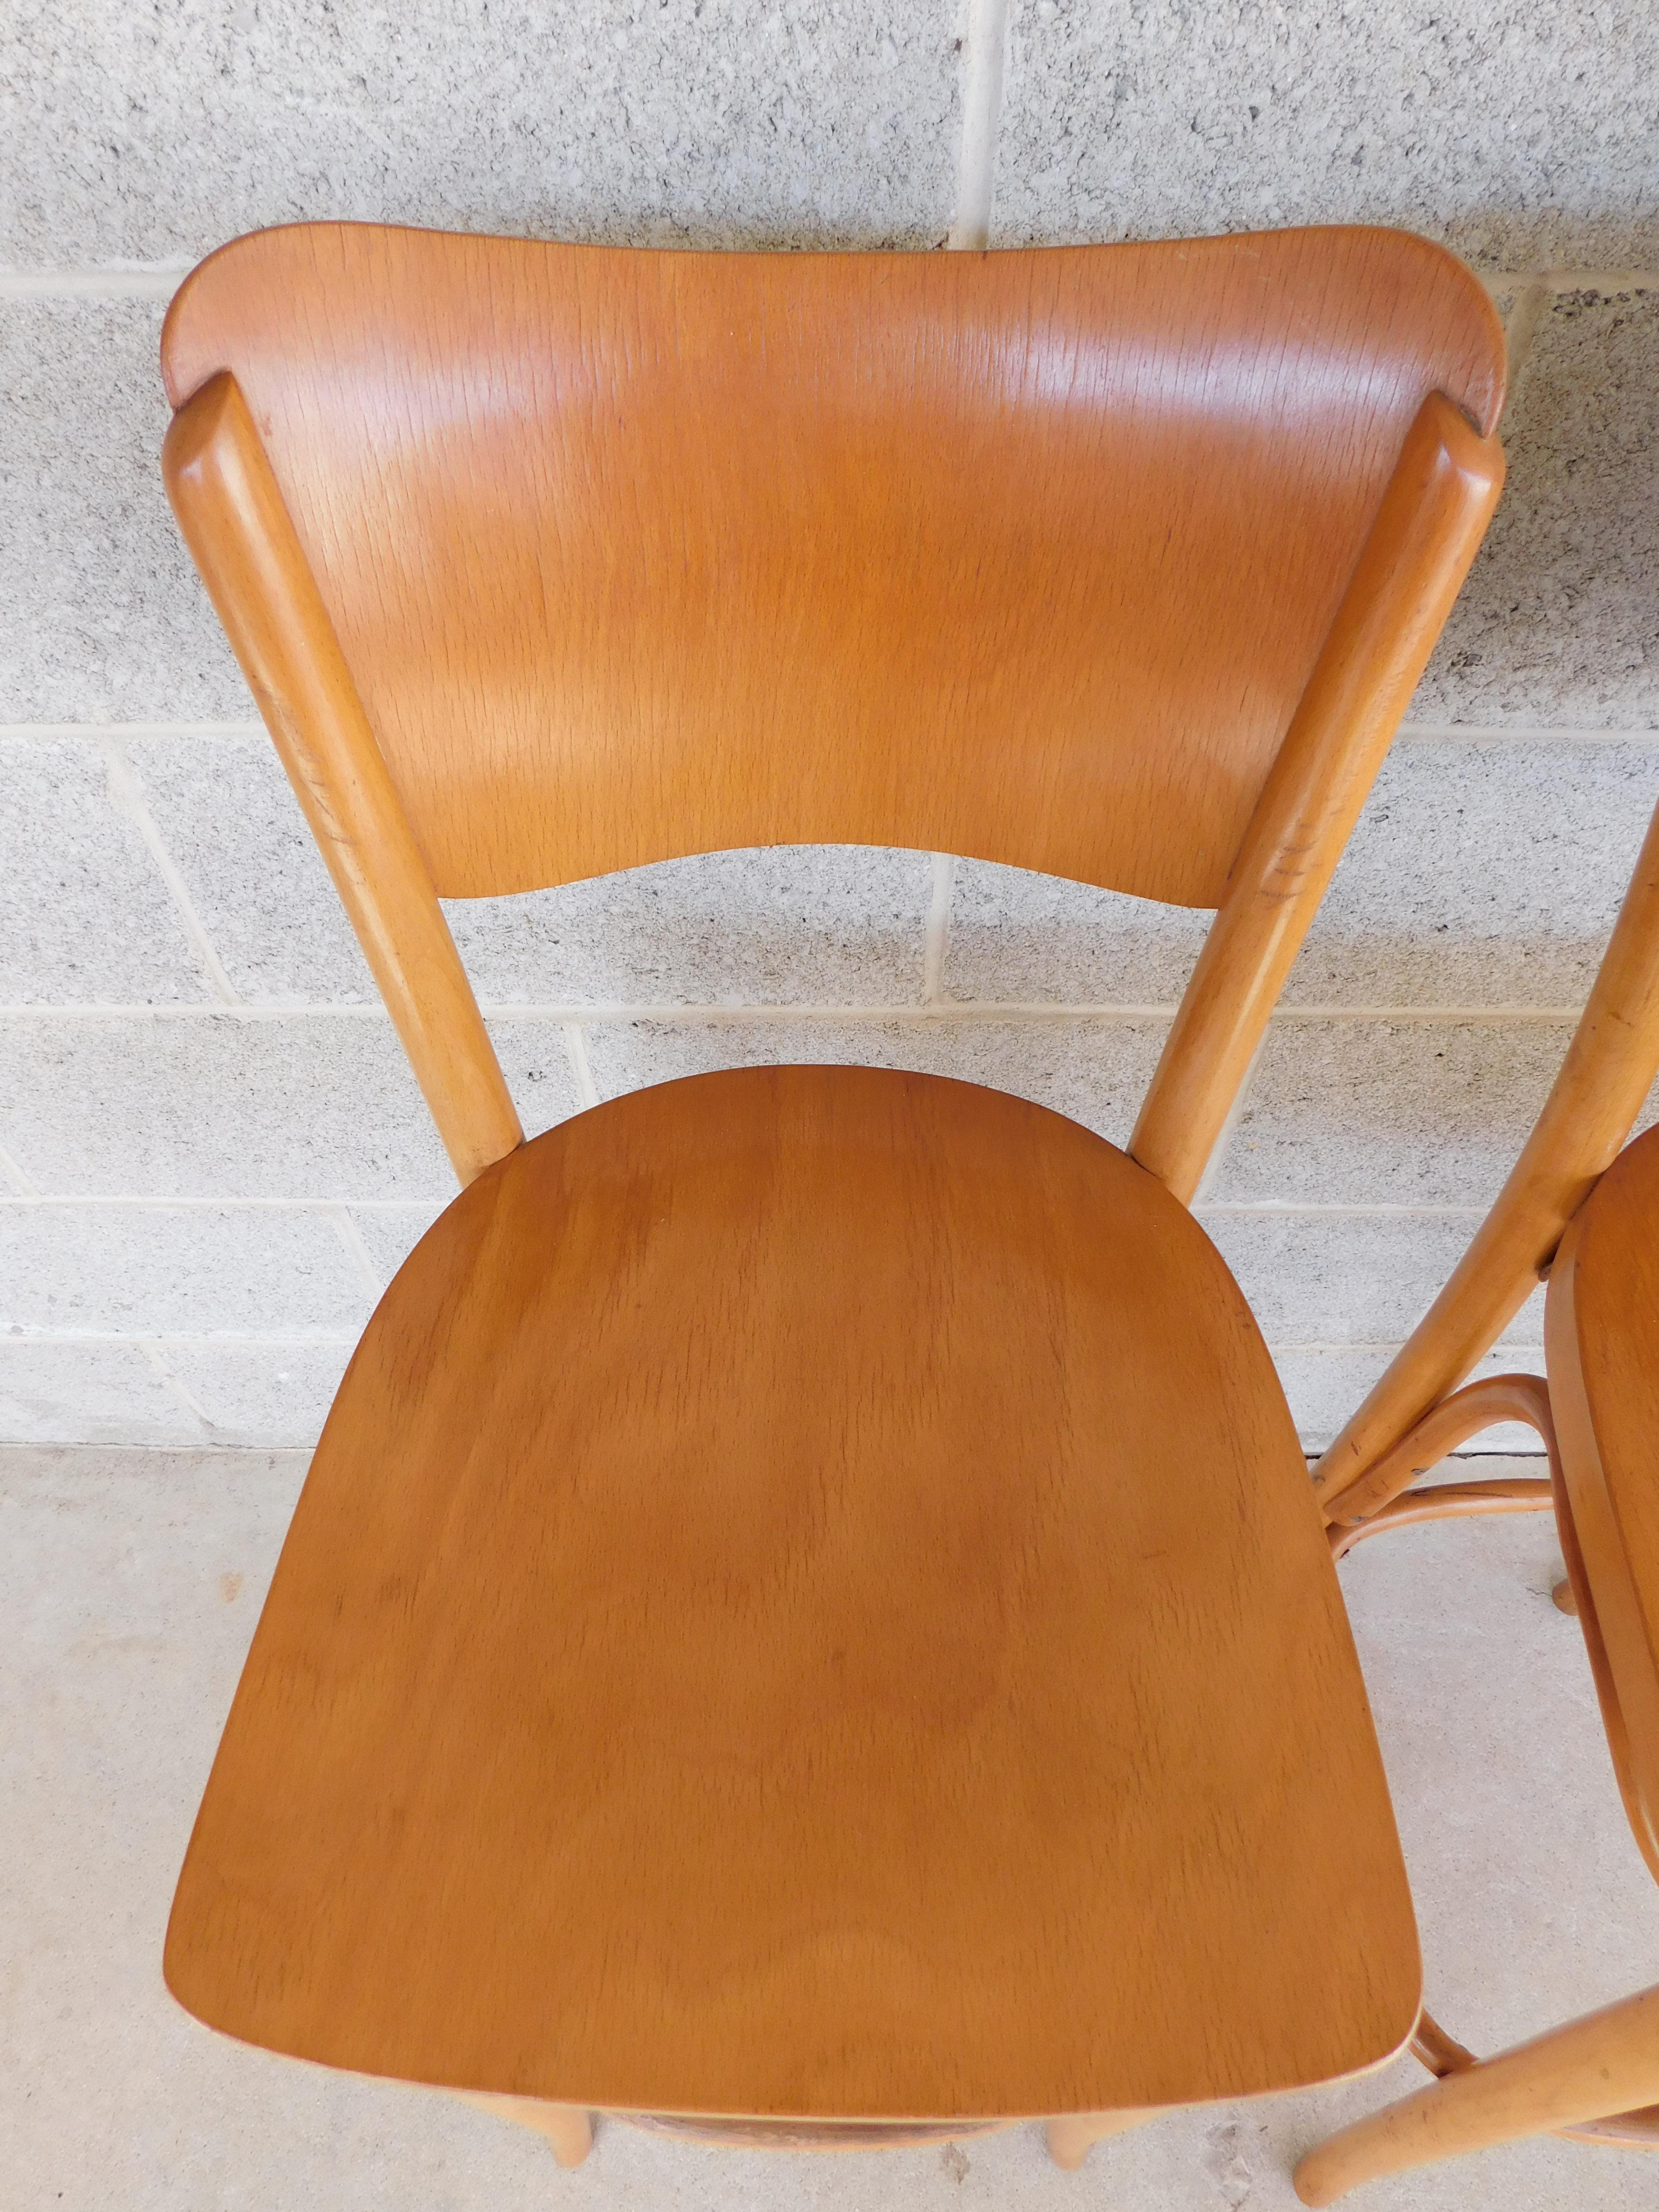 Midcentury design, with bentwood leg center brace support lower foot rest. Back legs extend up through the curved contoured back rest. Attributed to Thonet made in Poland. 

Label is Unrecognizable 

Measures: Back height 42.5